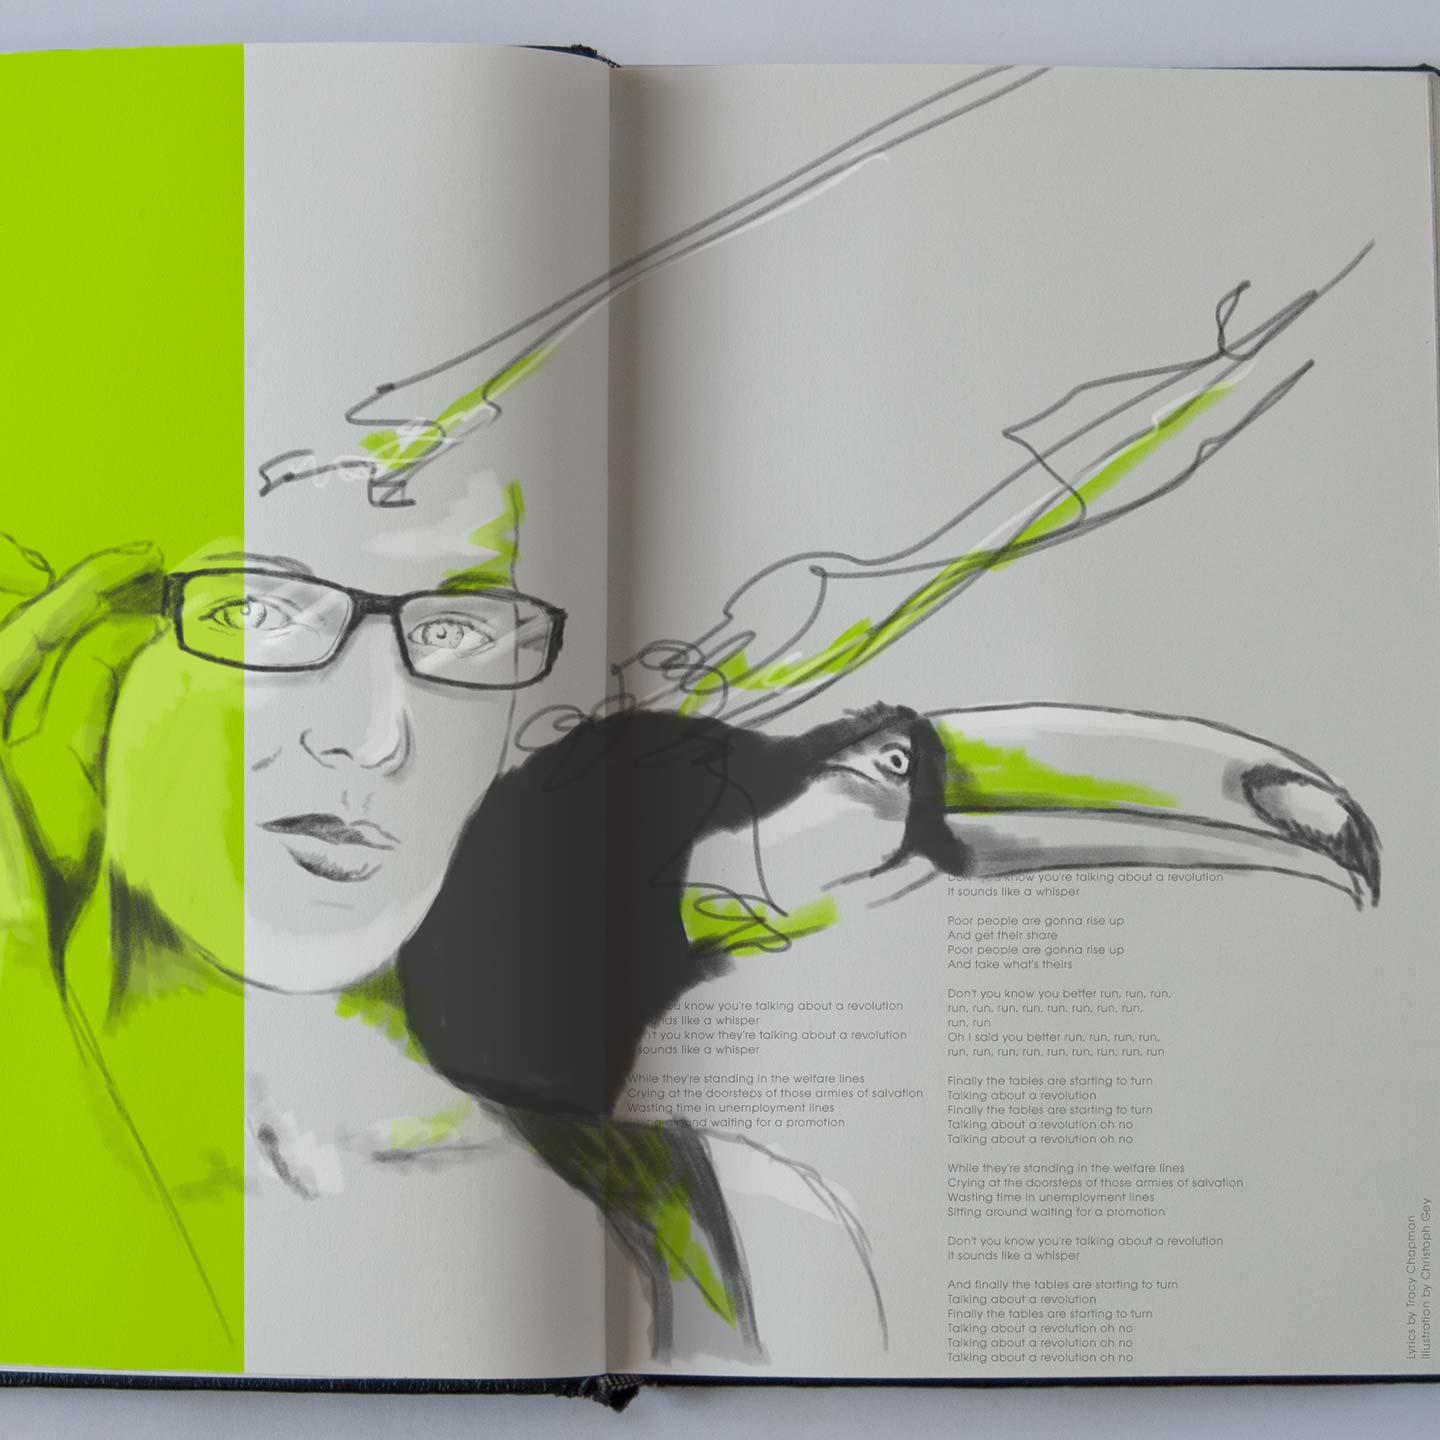 Magazine Illustration by the freelance art director Christoph Gey from Cologne